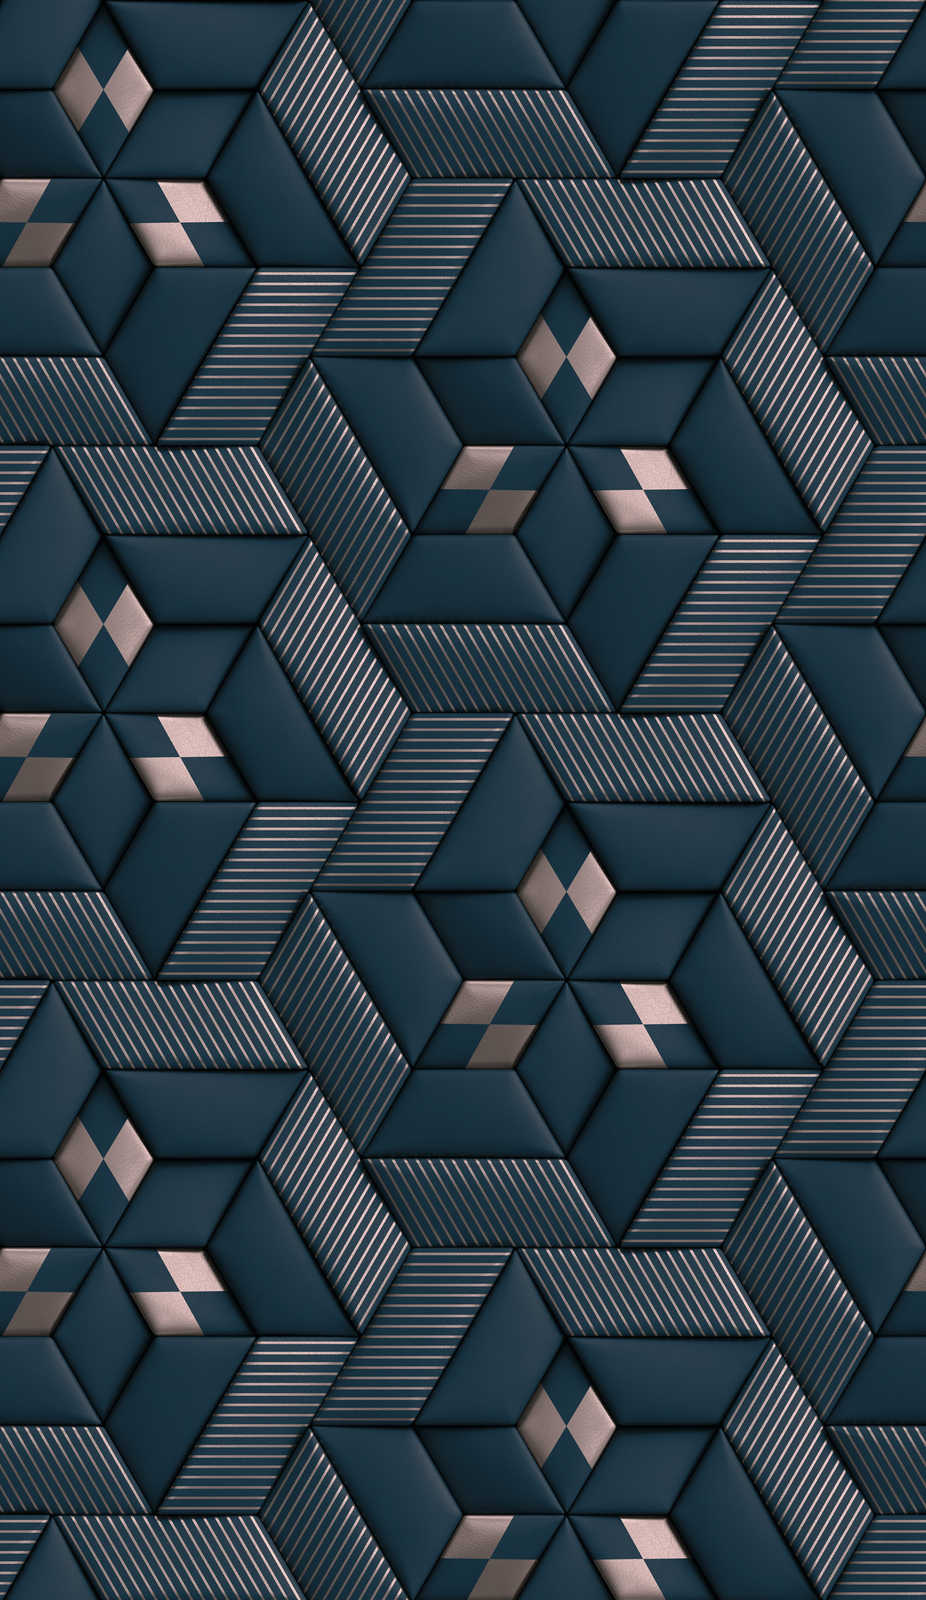             Non-woven wallpaper with abstract 3D pattern - blue, silver
        